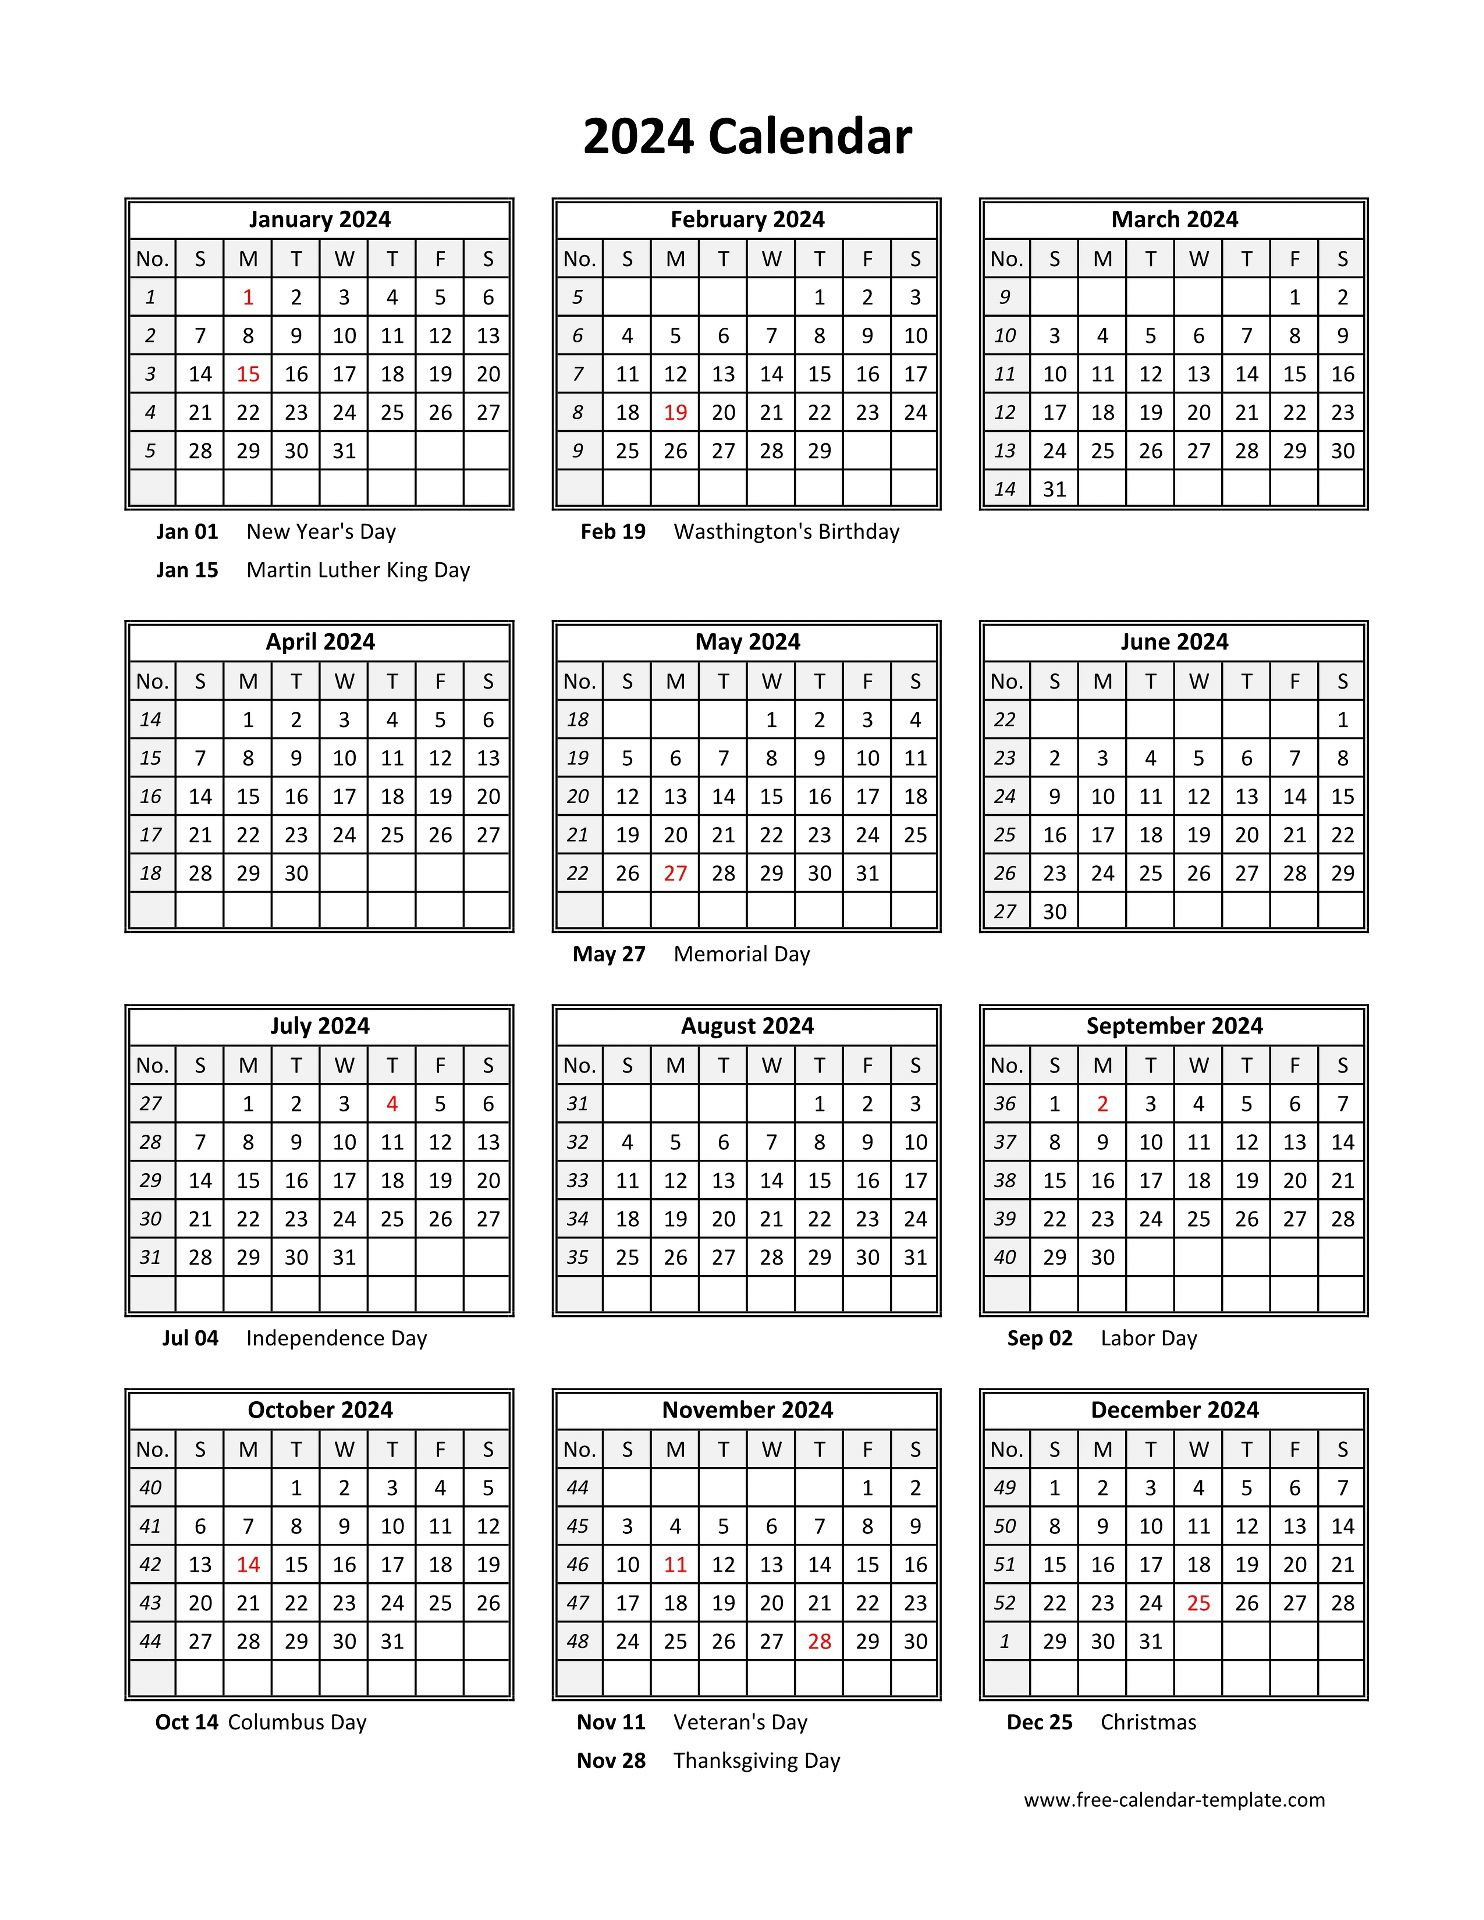 Yearly Printable Calendar 2024 With Holidays | Free-Calendar | Printable Calendar 2024 With Holidays Printable Pdf